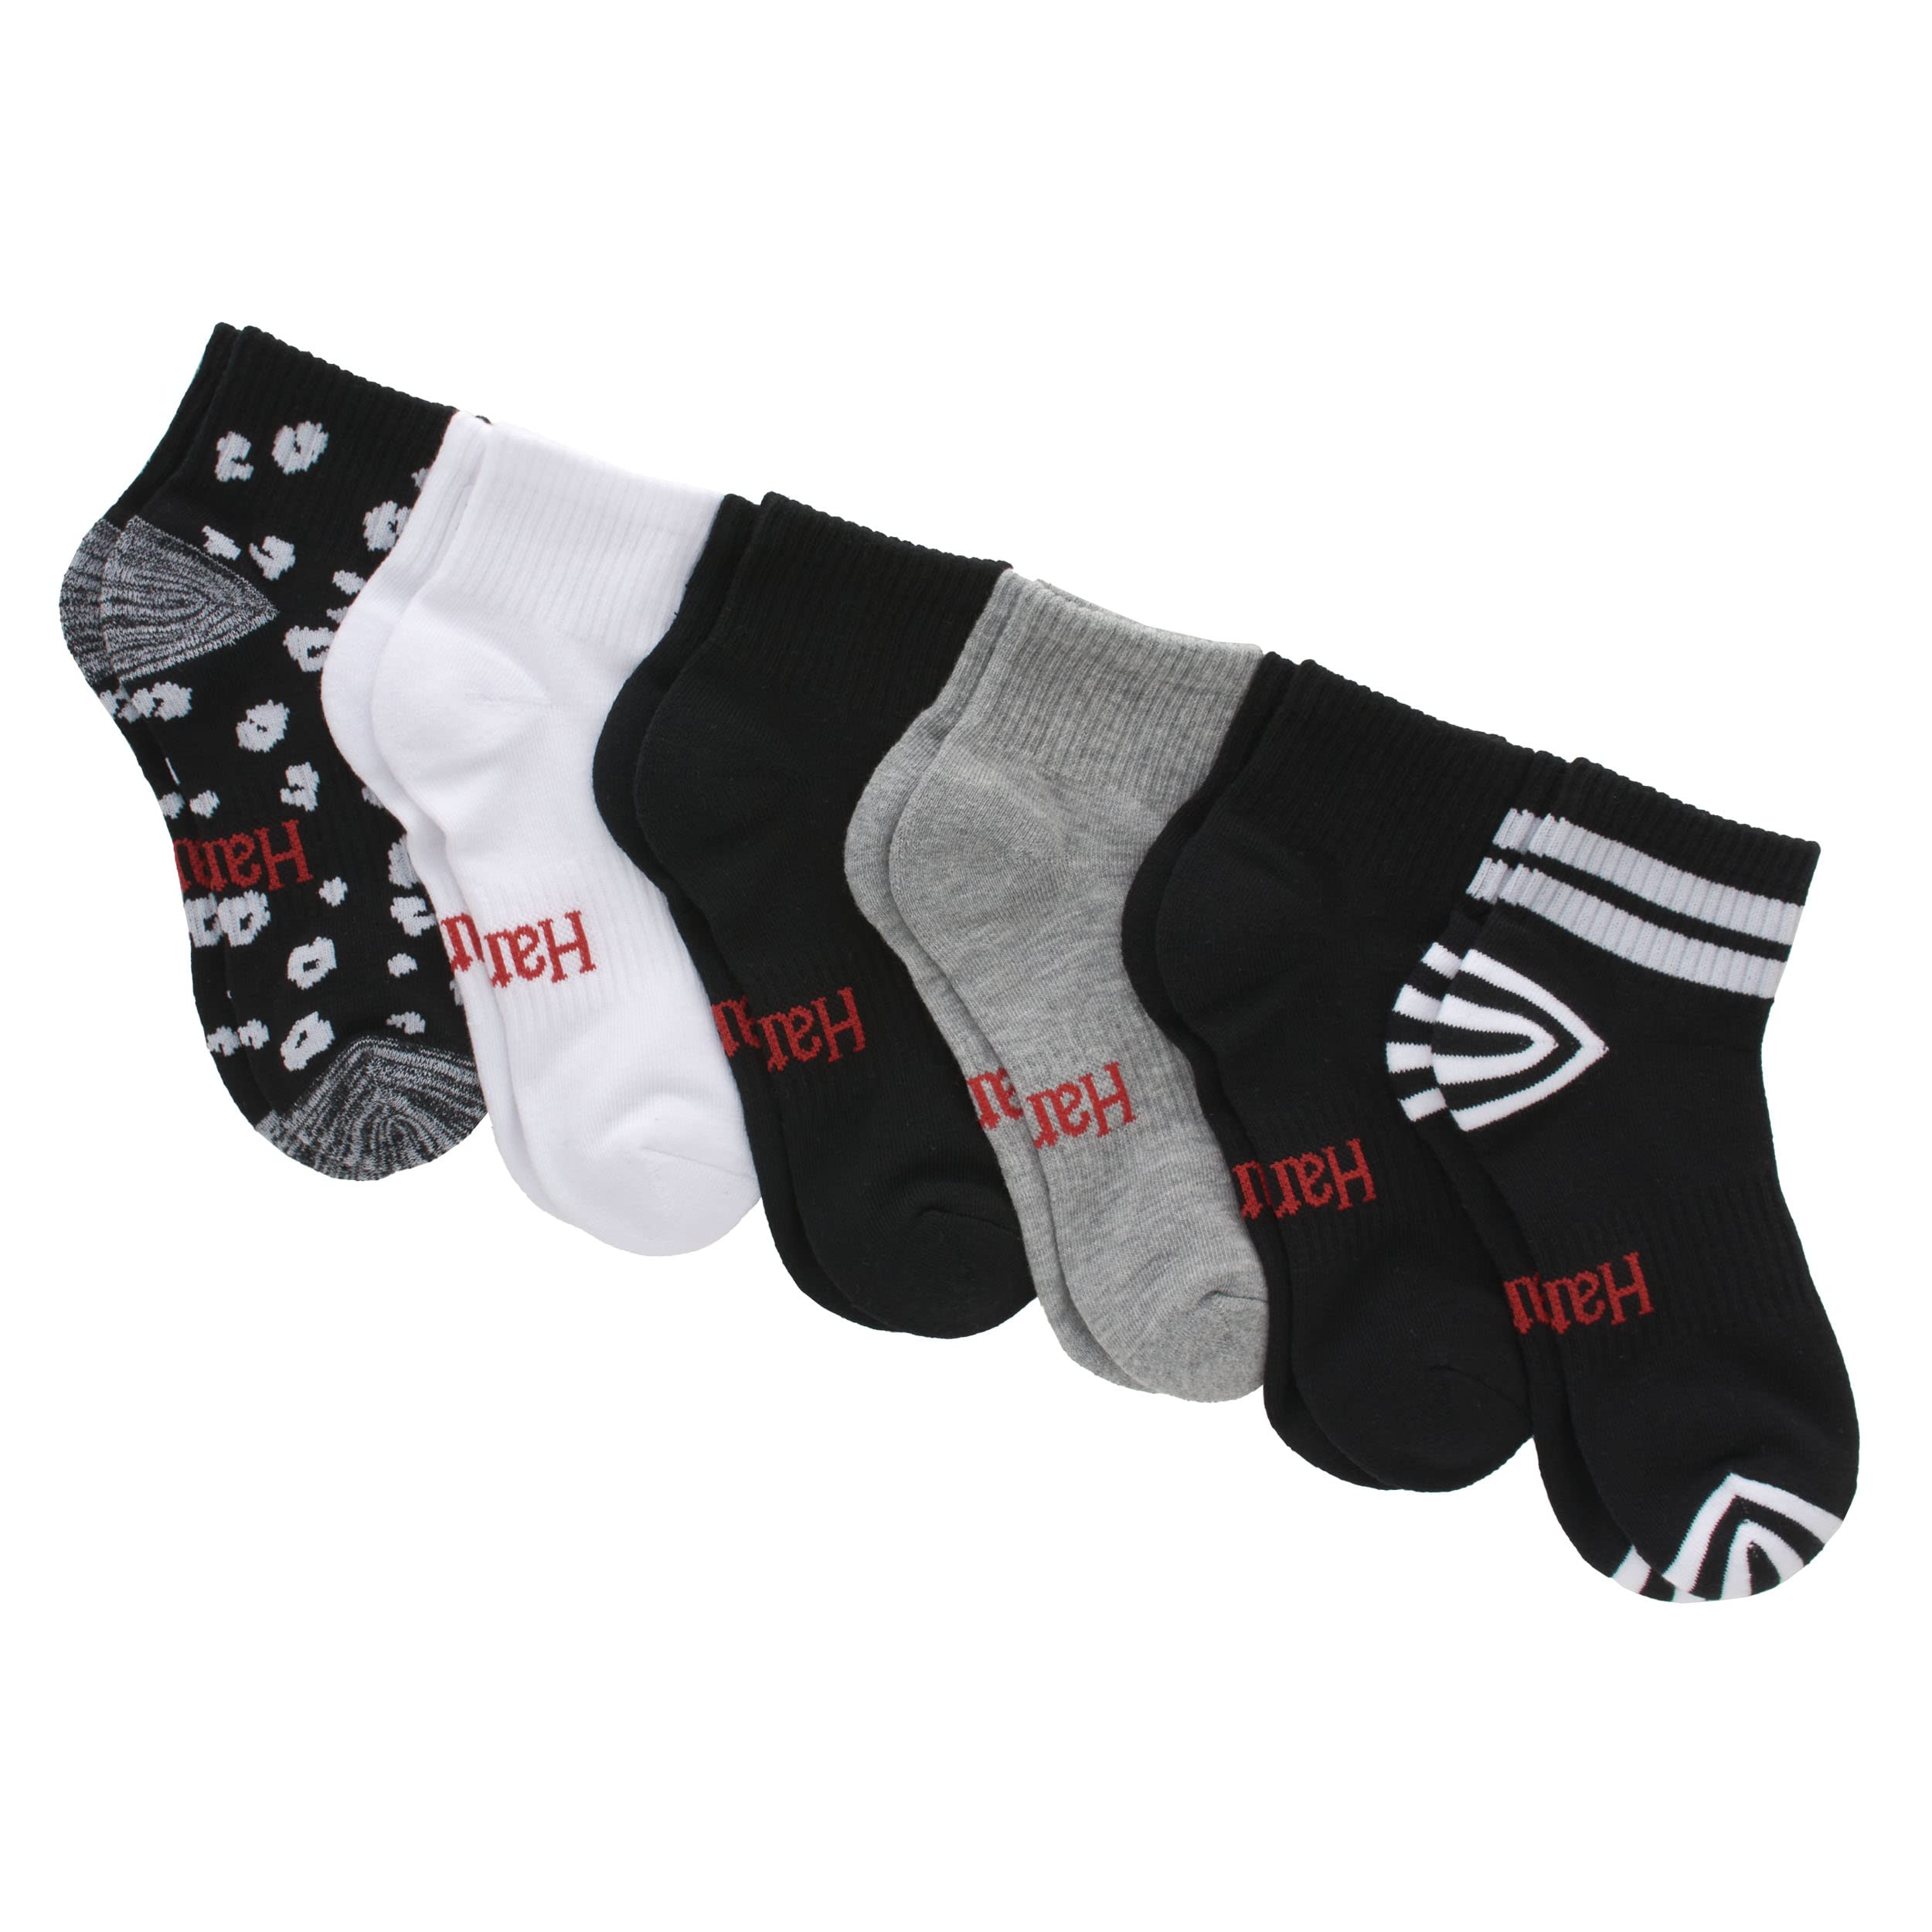 Hanes Originals Ultimate Women's Socks, Crew, Ankle and No Show Socks, 6-Pack